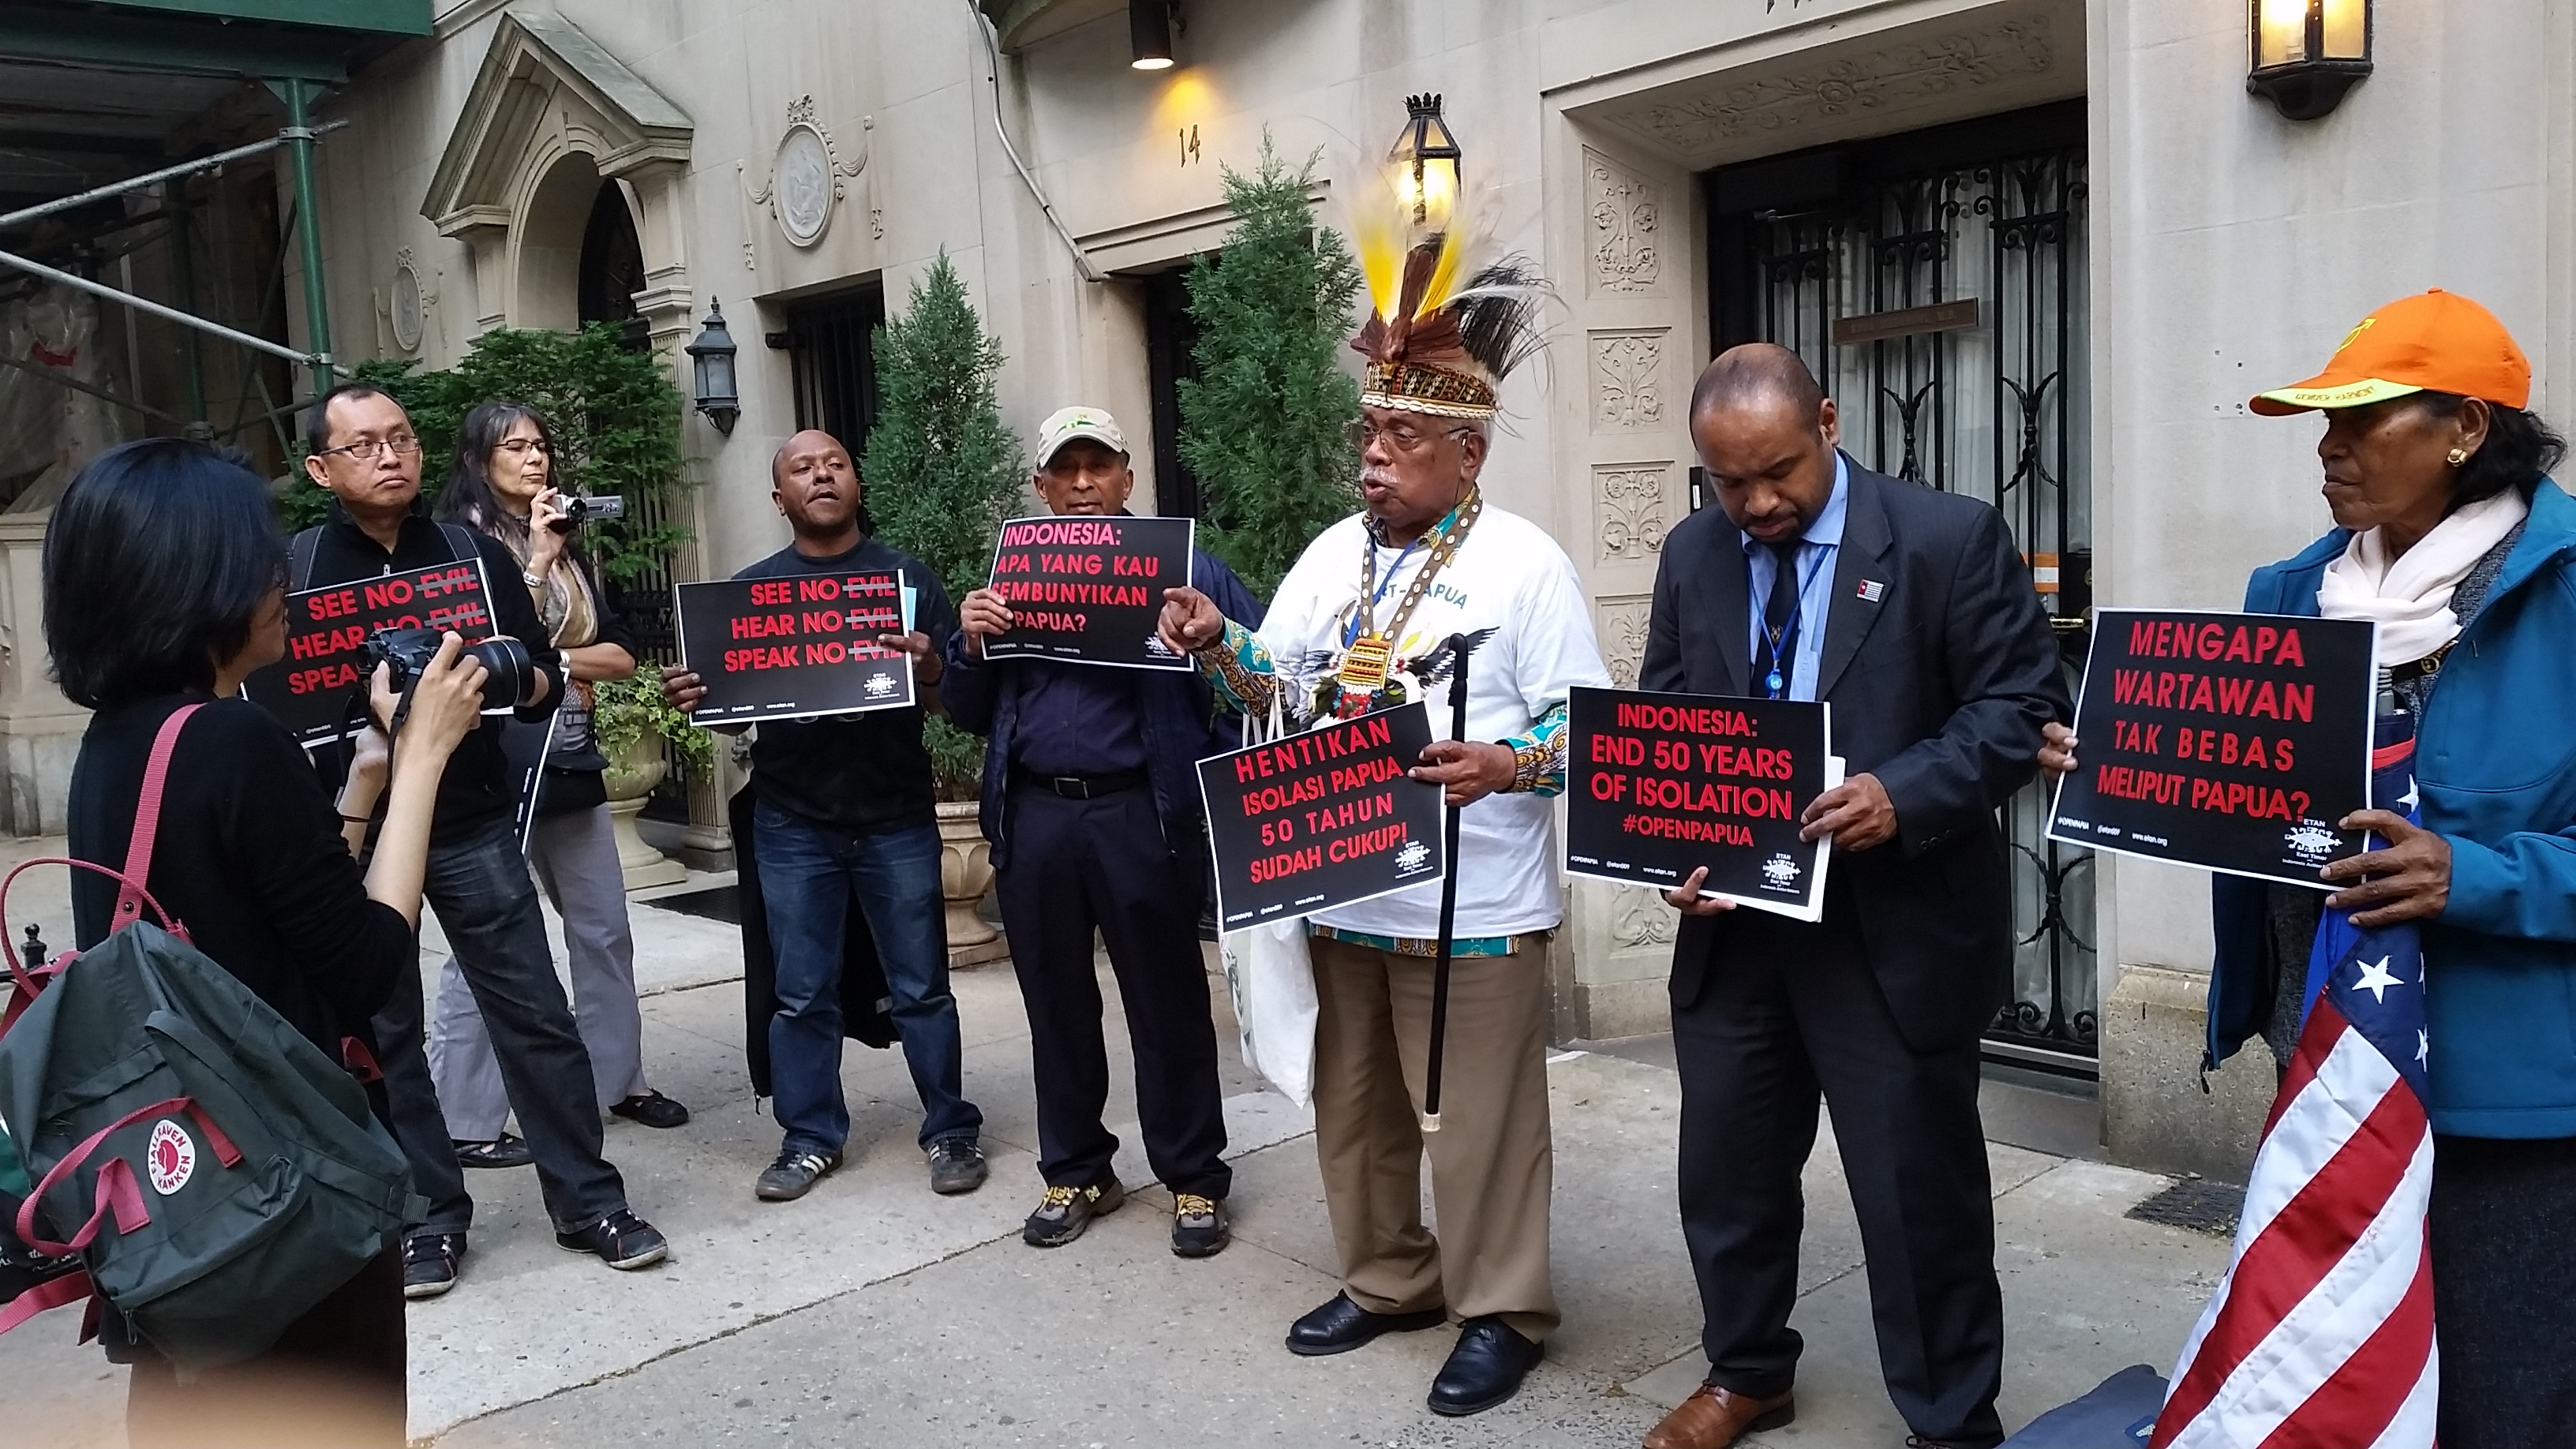 NYC #openpapua demonstration at Indonesian consulate